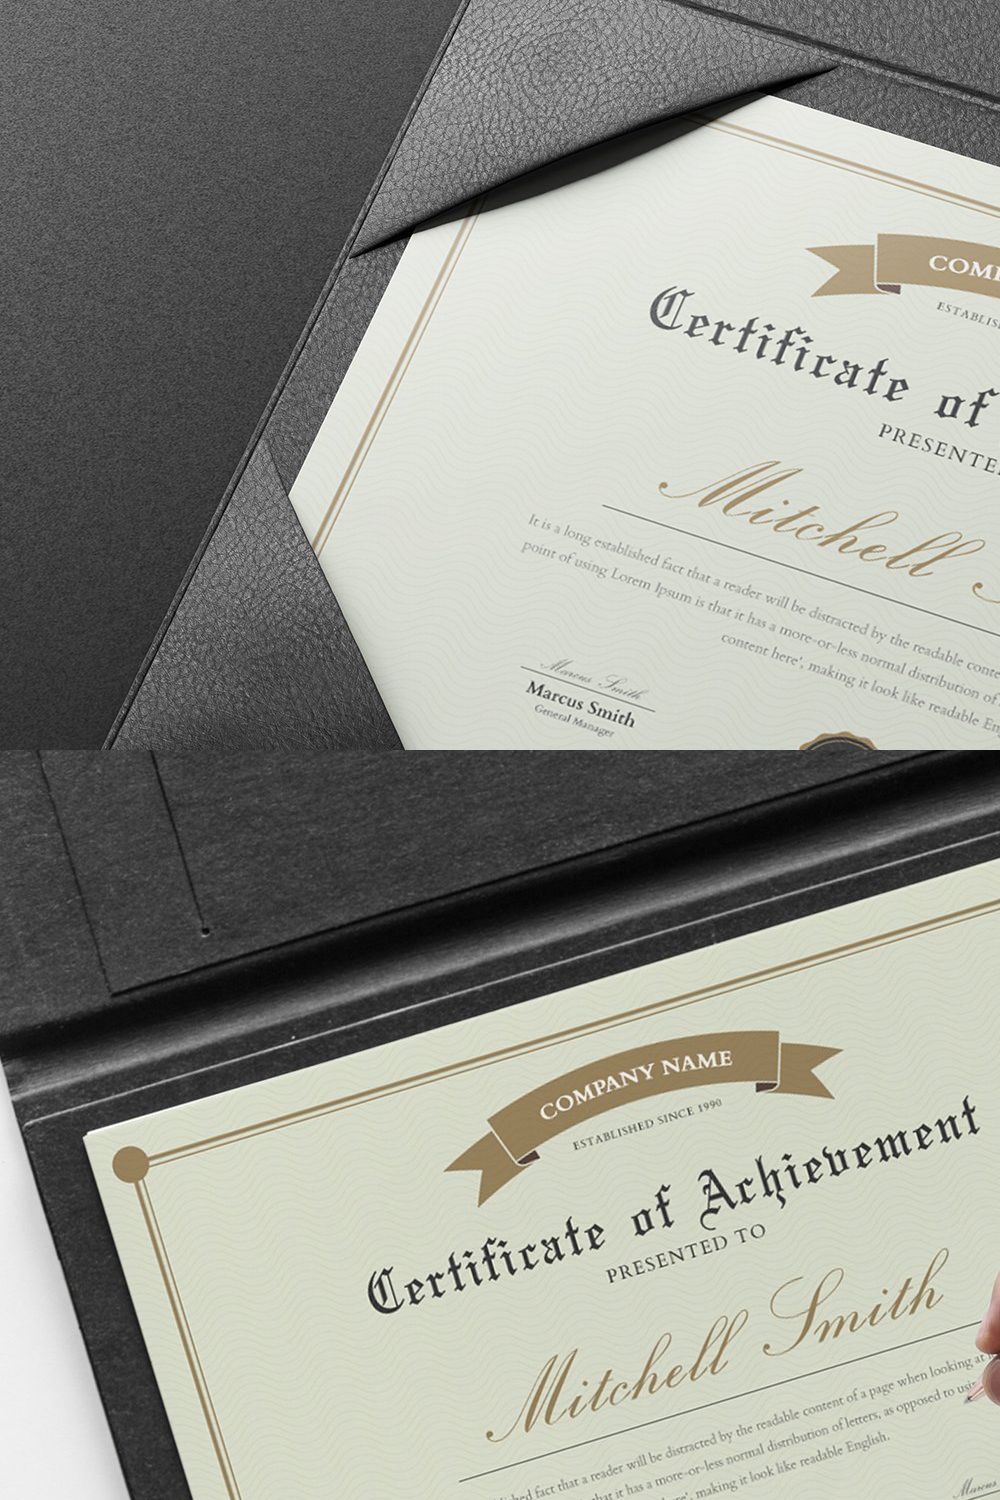 Certificate Template pinterest preview image.